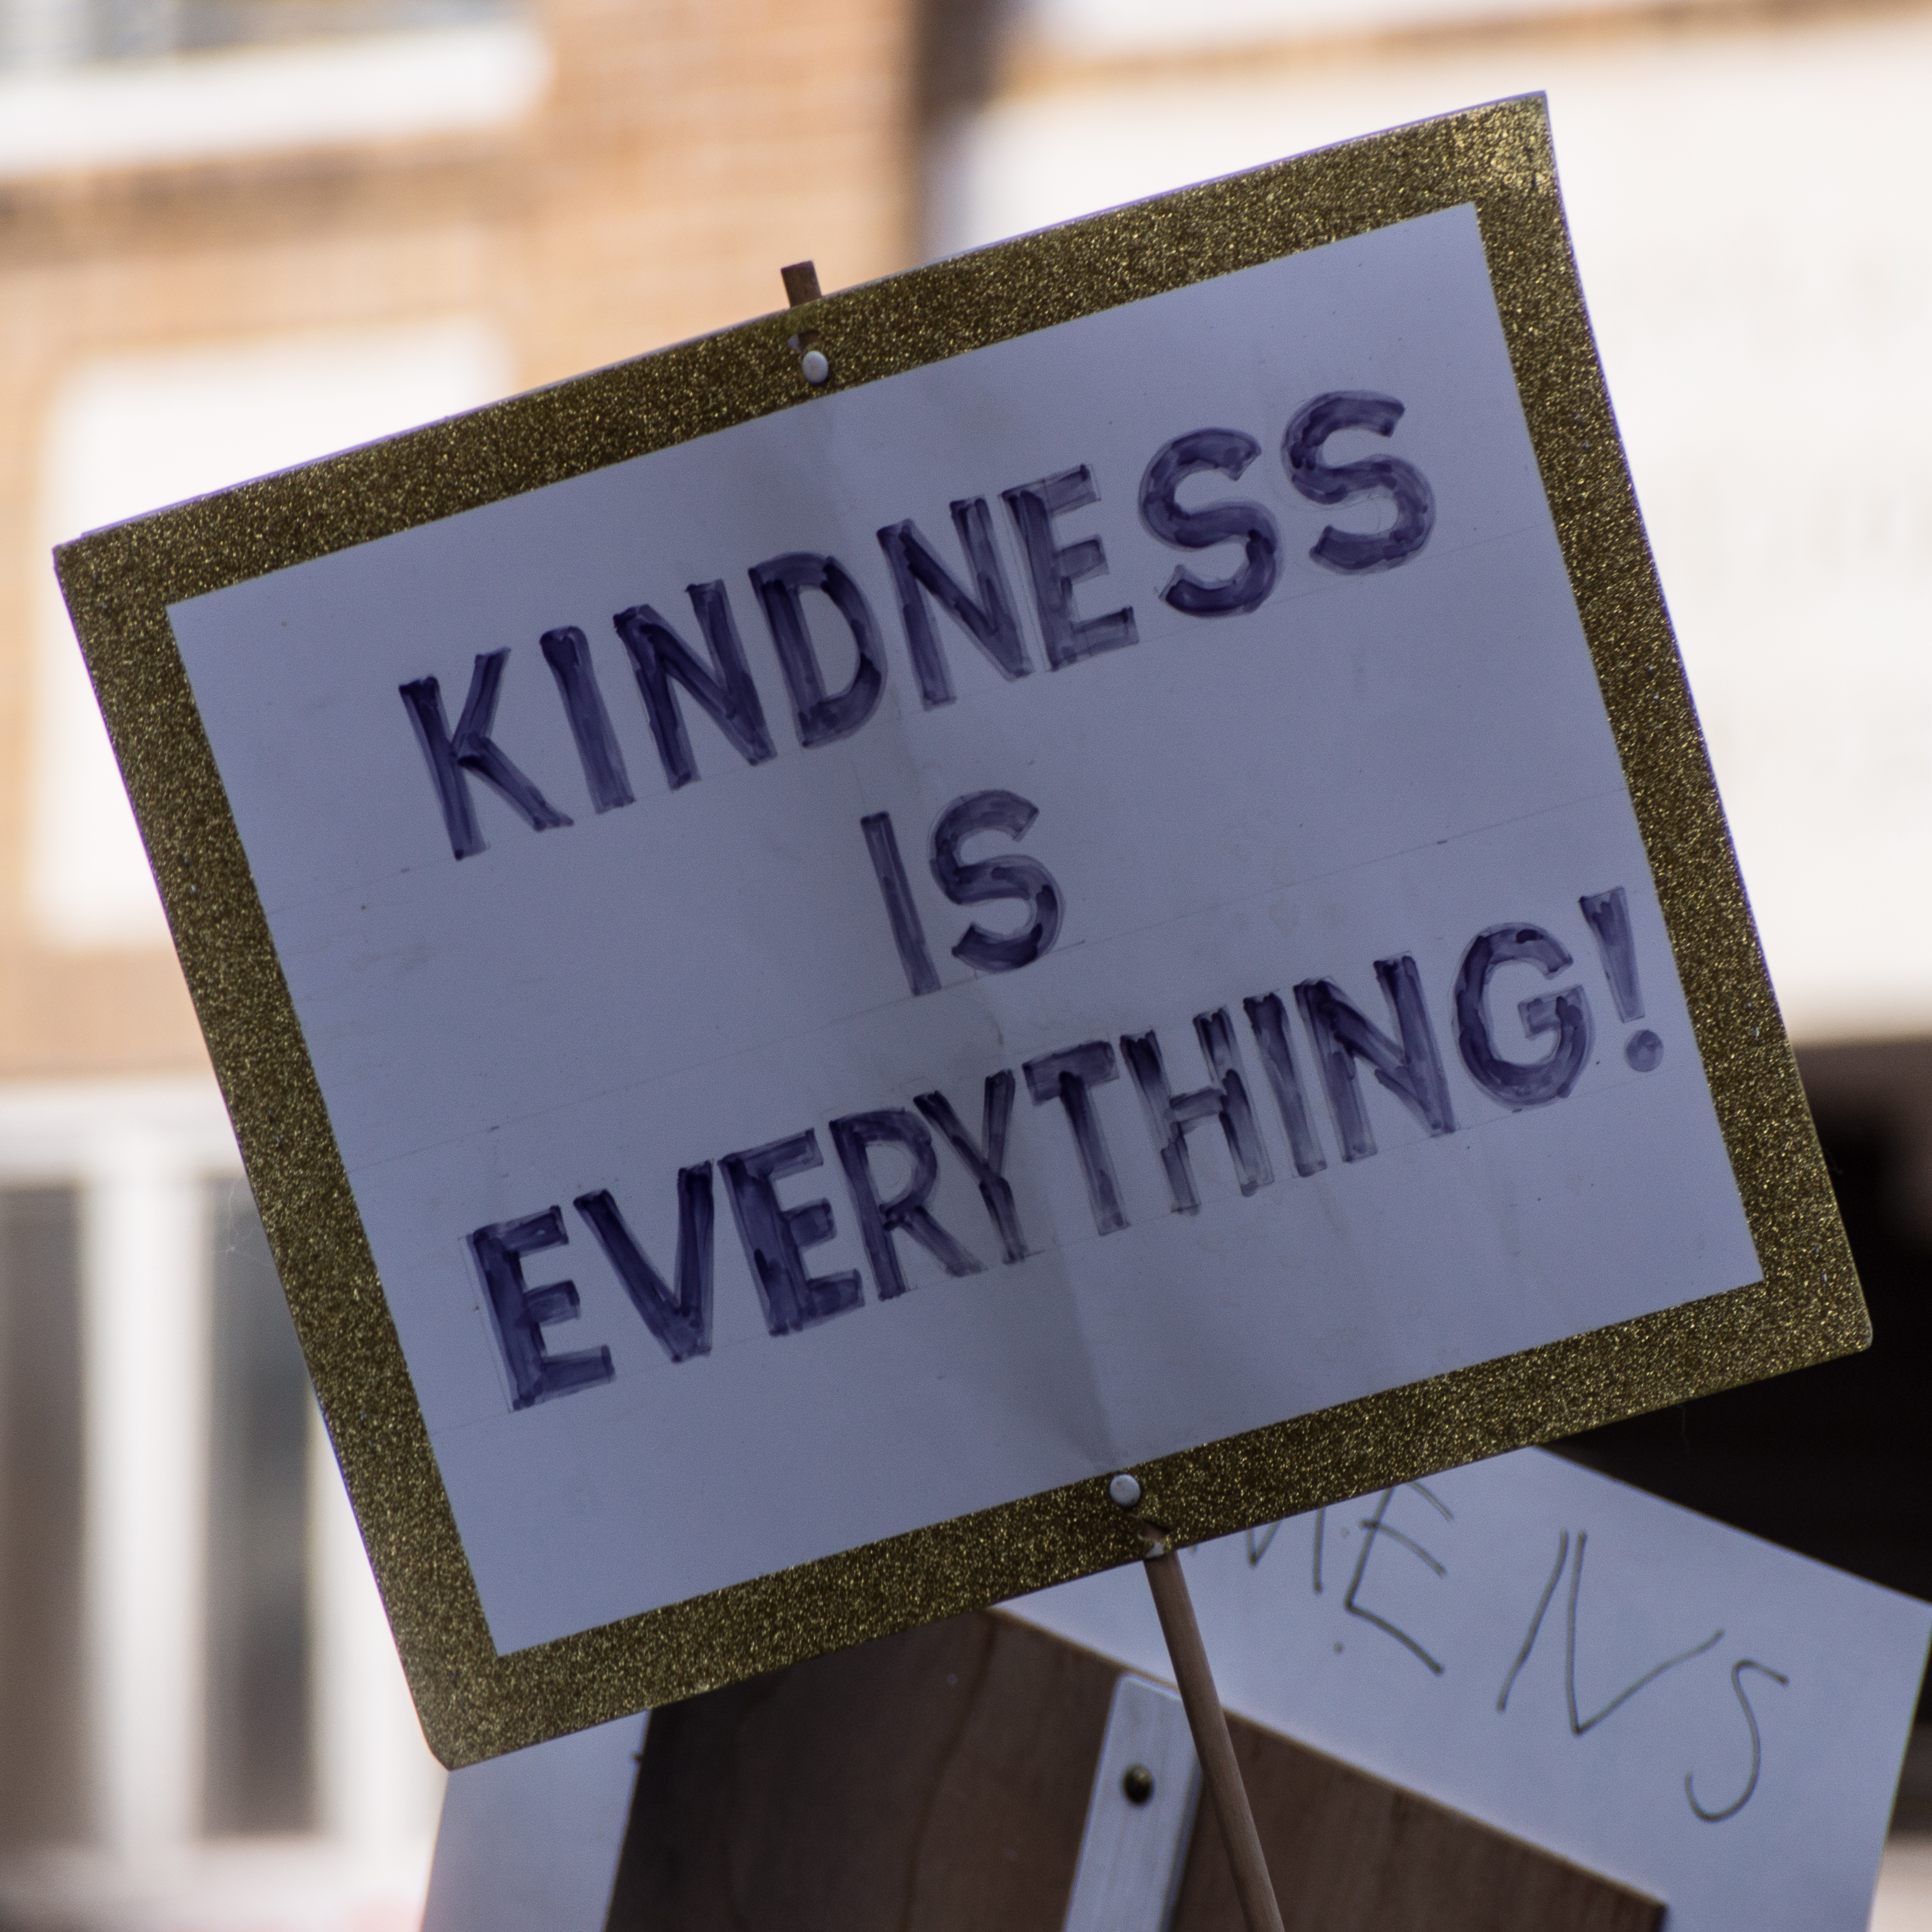 Kindness_is_everything%21_-WomensMarch_-WomensMarch2018_-SenecaFalls_-NY_%2824937353927%29